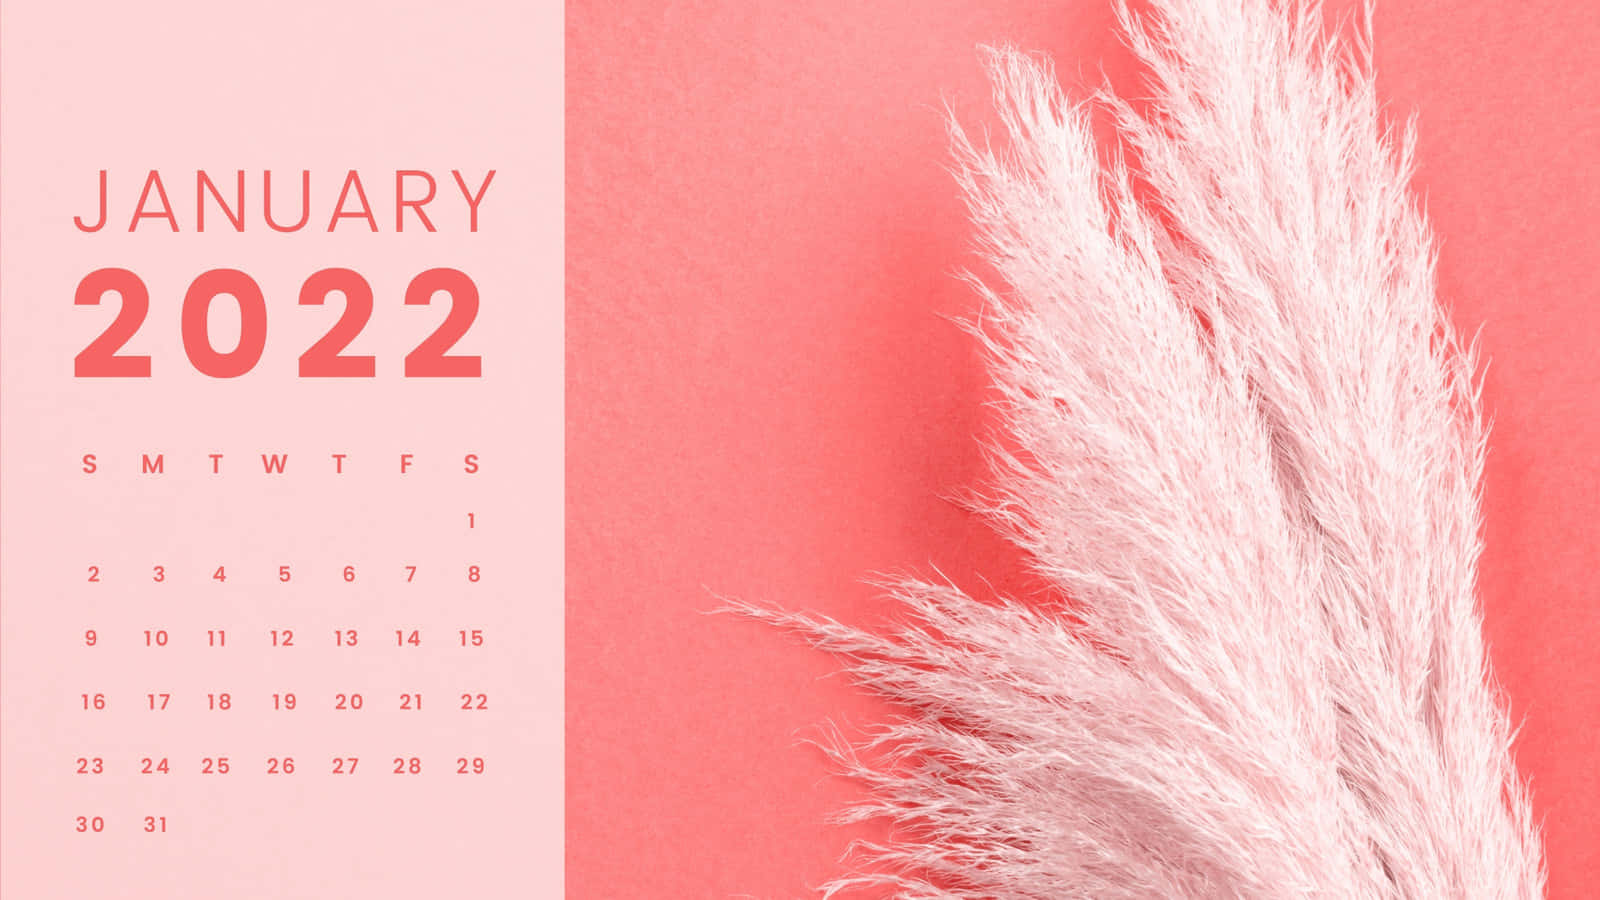 January 2022 Calendar on an Elegant Abstract Background